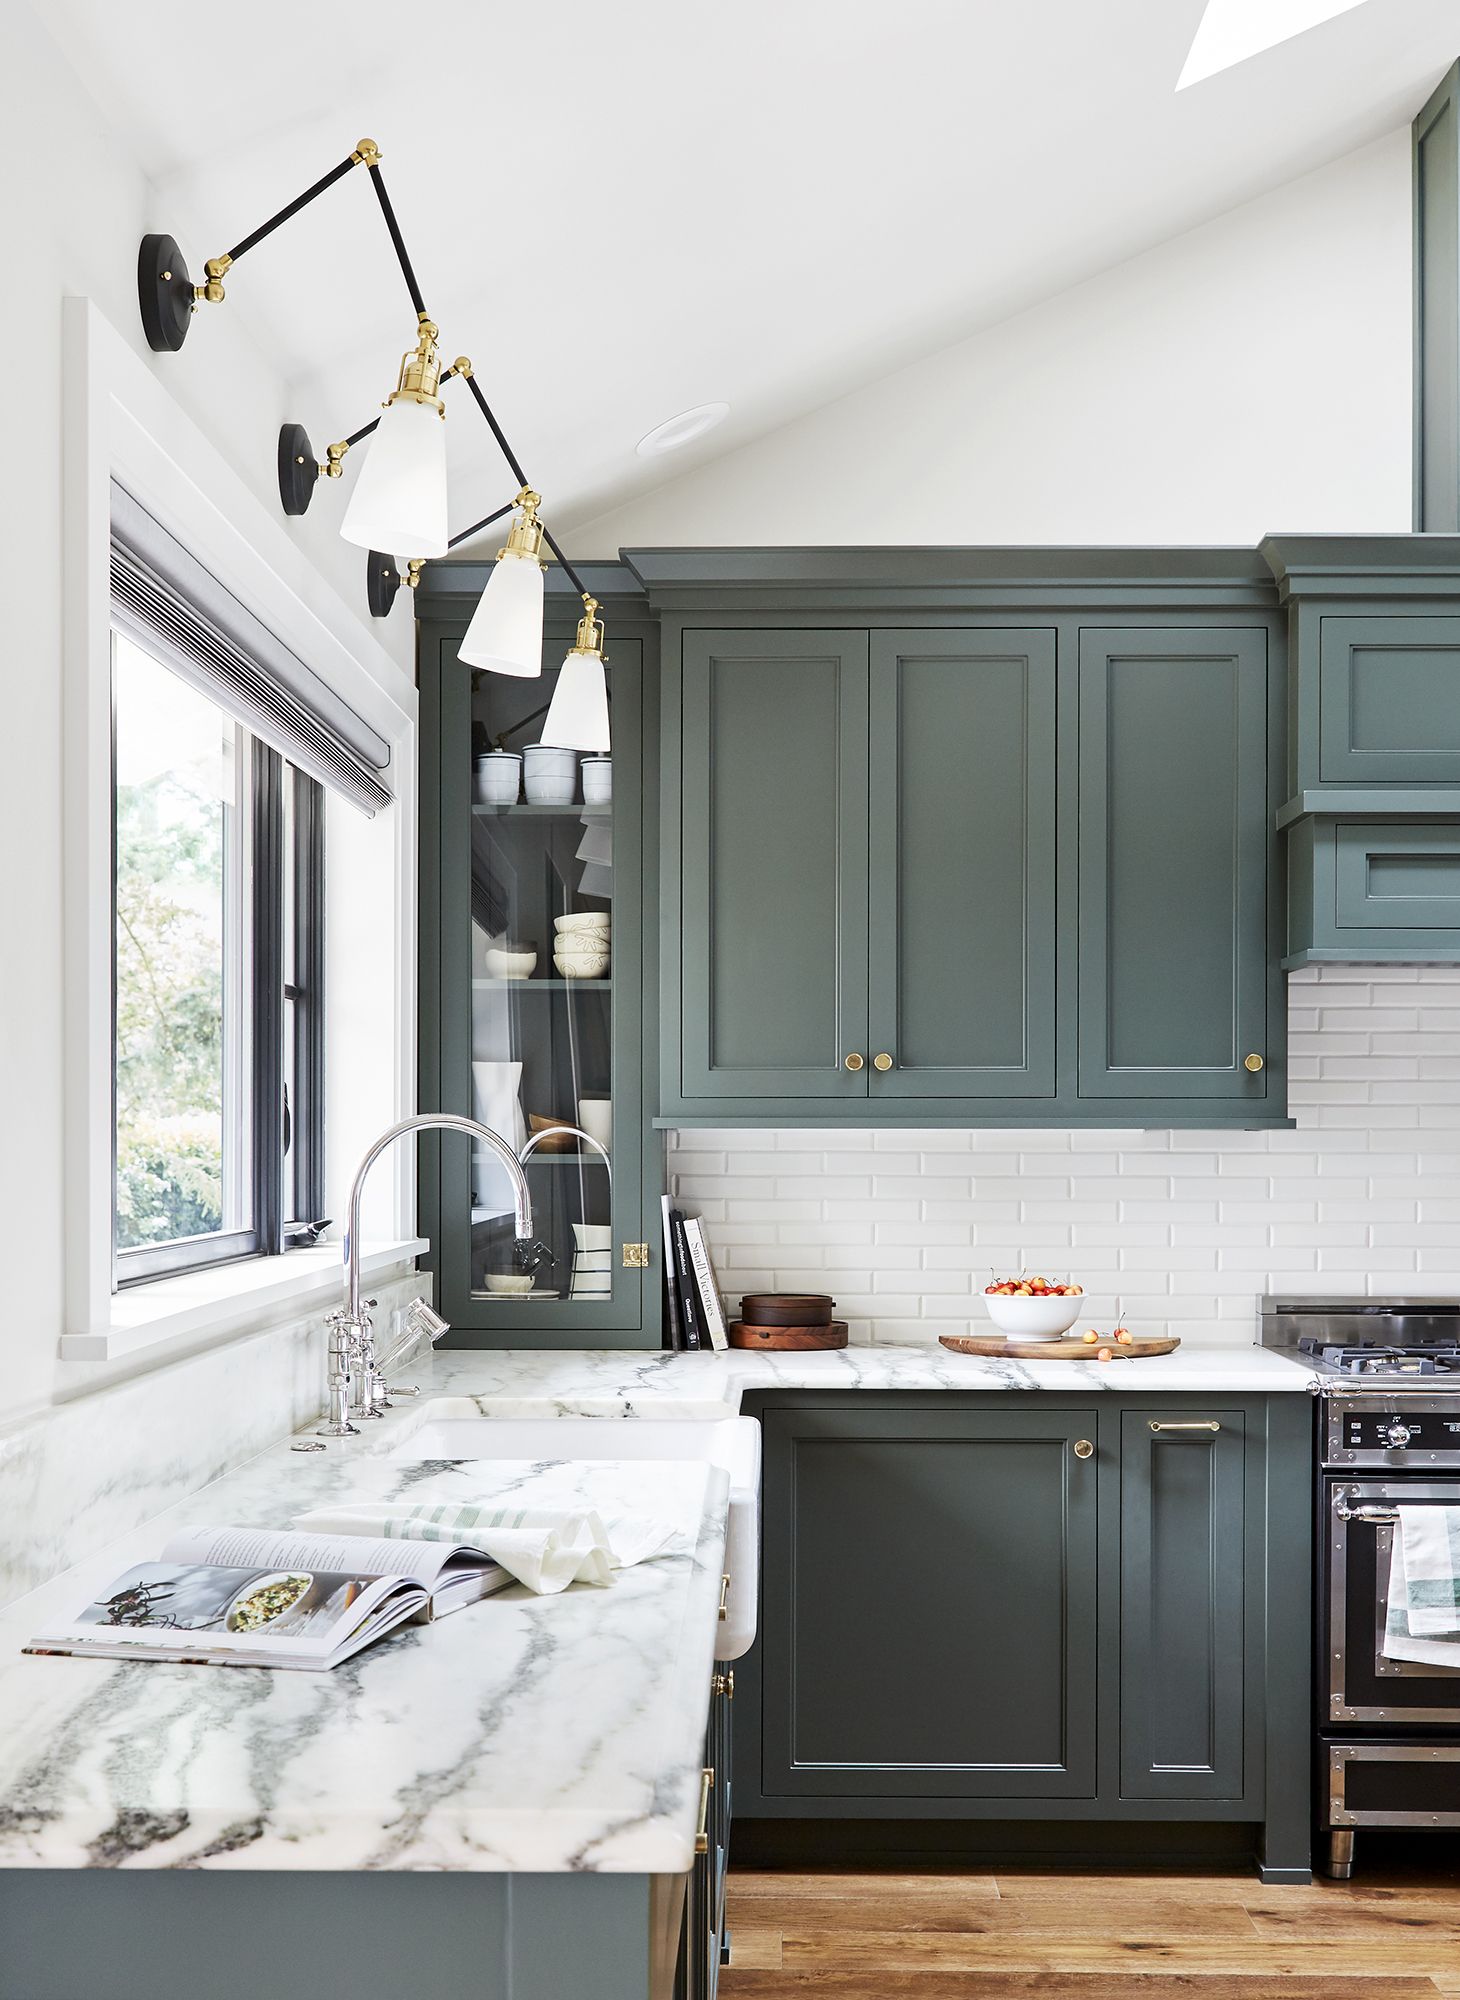 How To Paint Your Kitchen Cabinets, Is Enamel Paint Good For Kitchen Cabinets